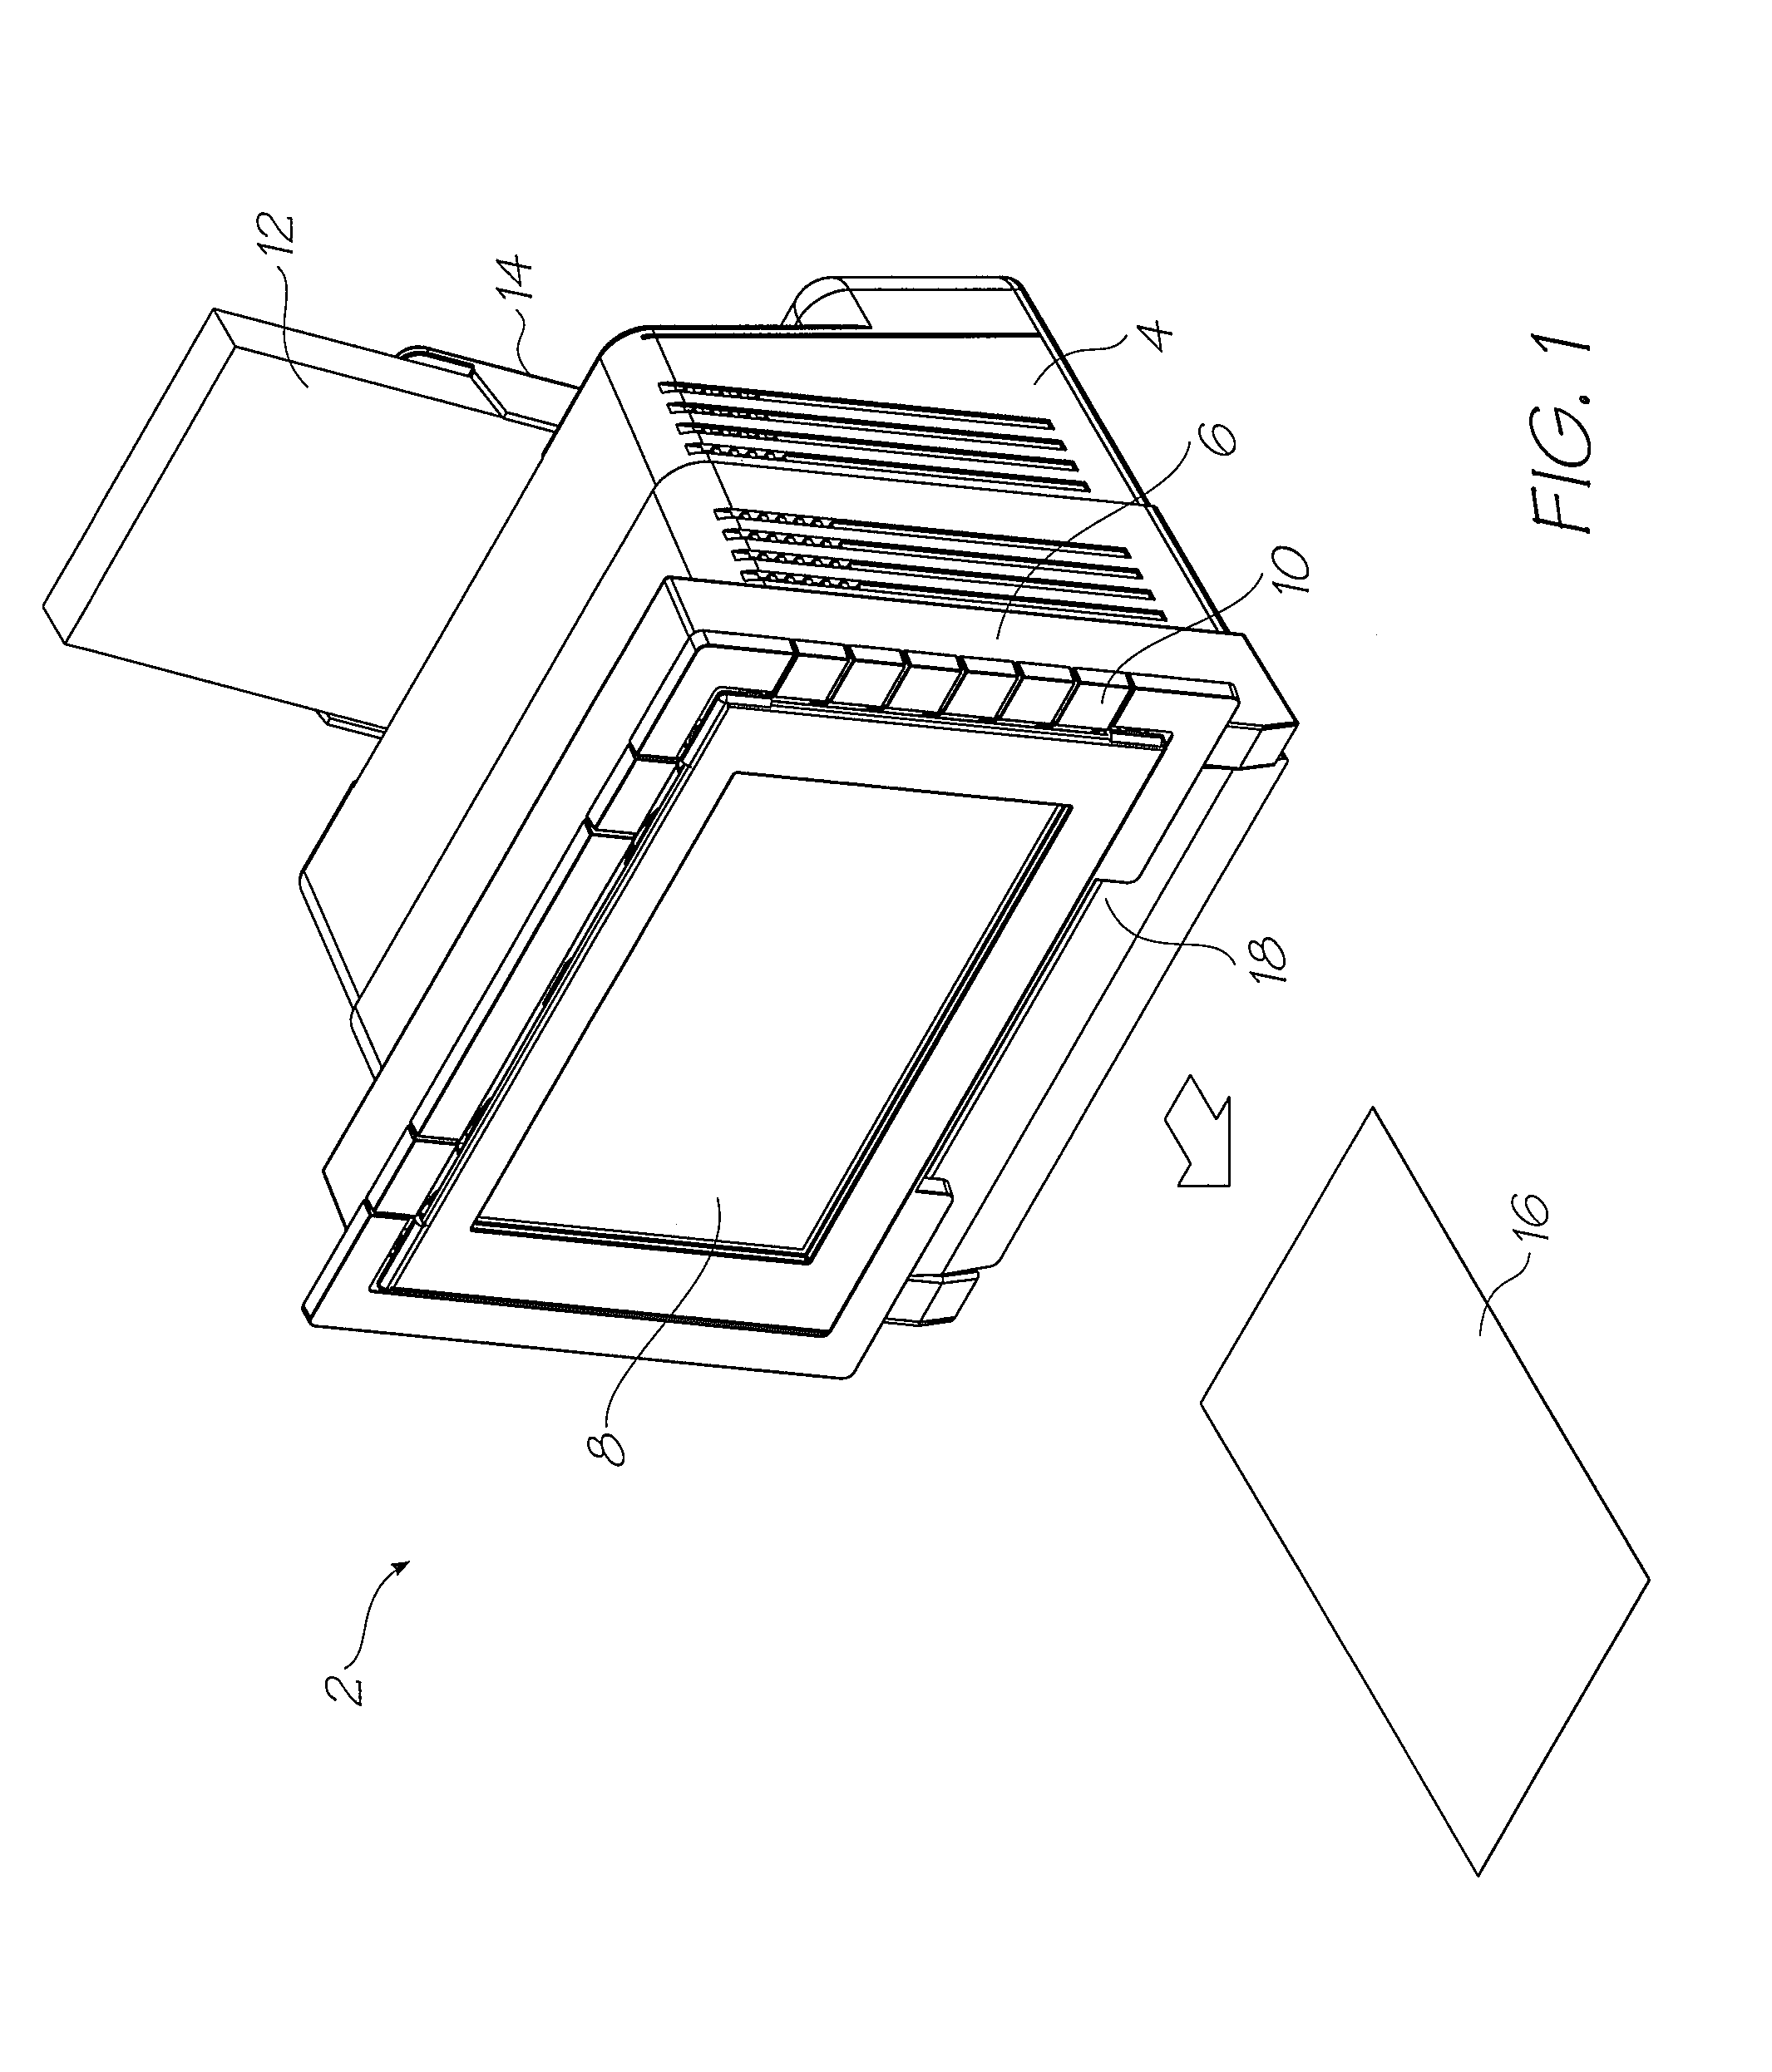 Printhead with elongate array of nozzles and distributed pulse dampers